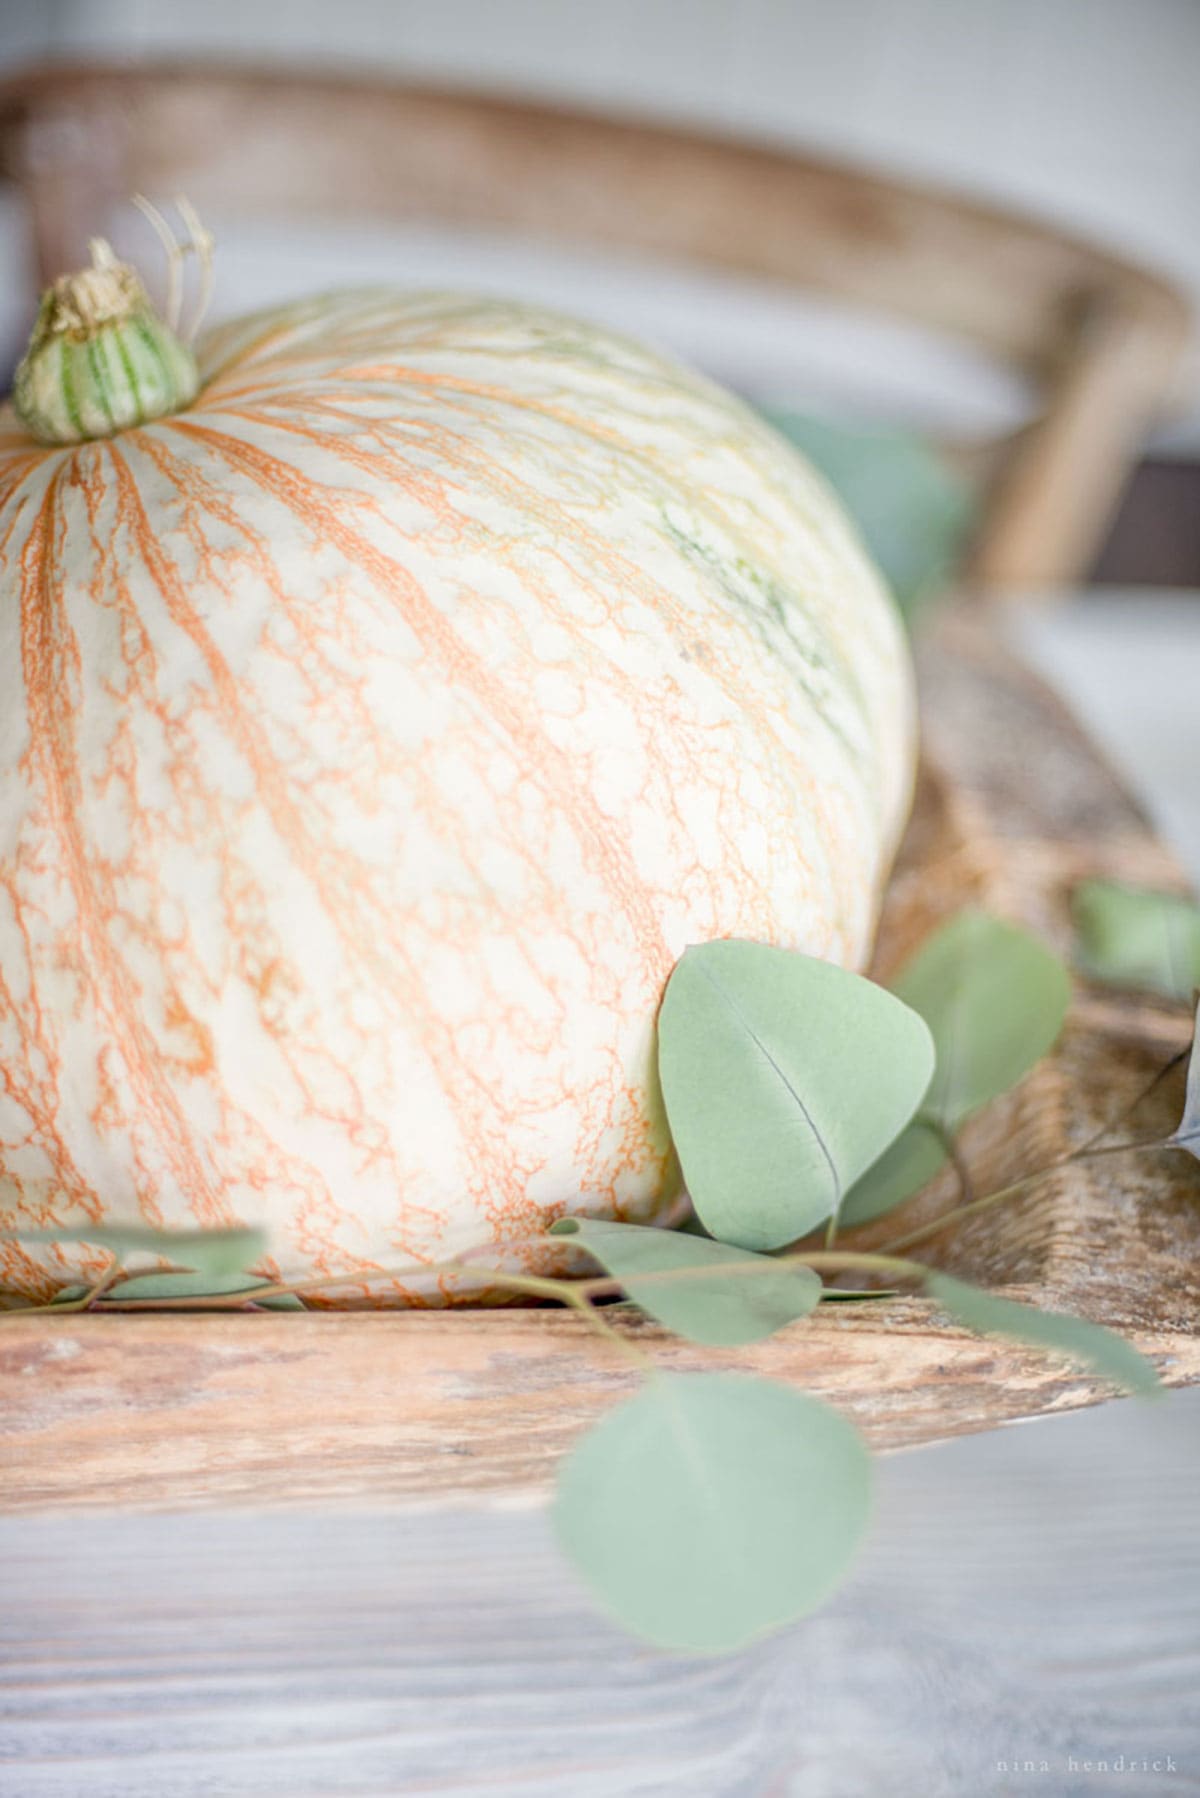 A pumpkin sits on a wooden table during a fall home tour.